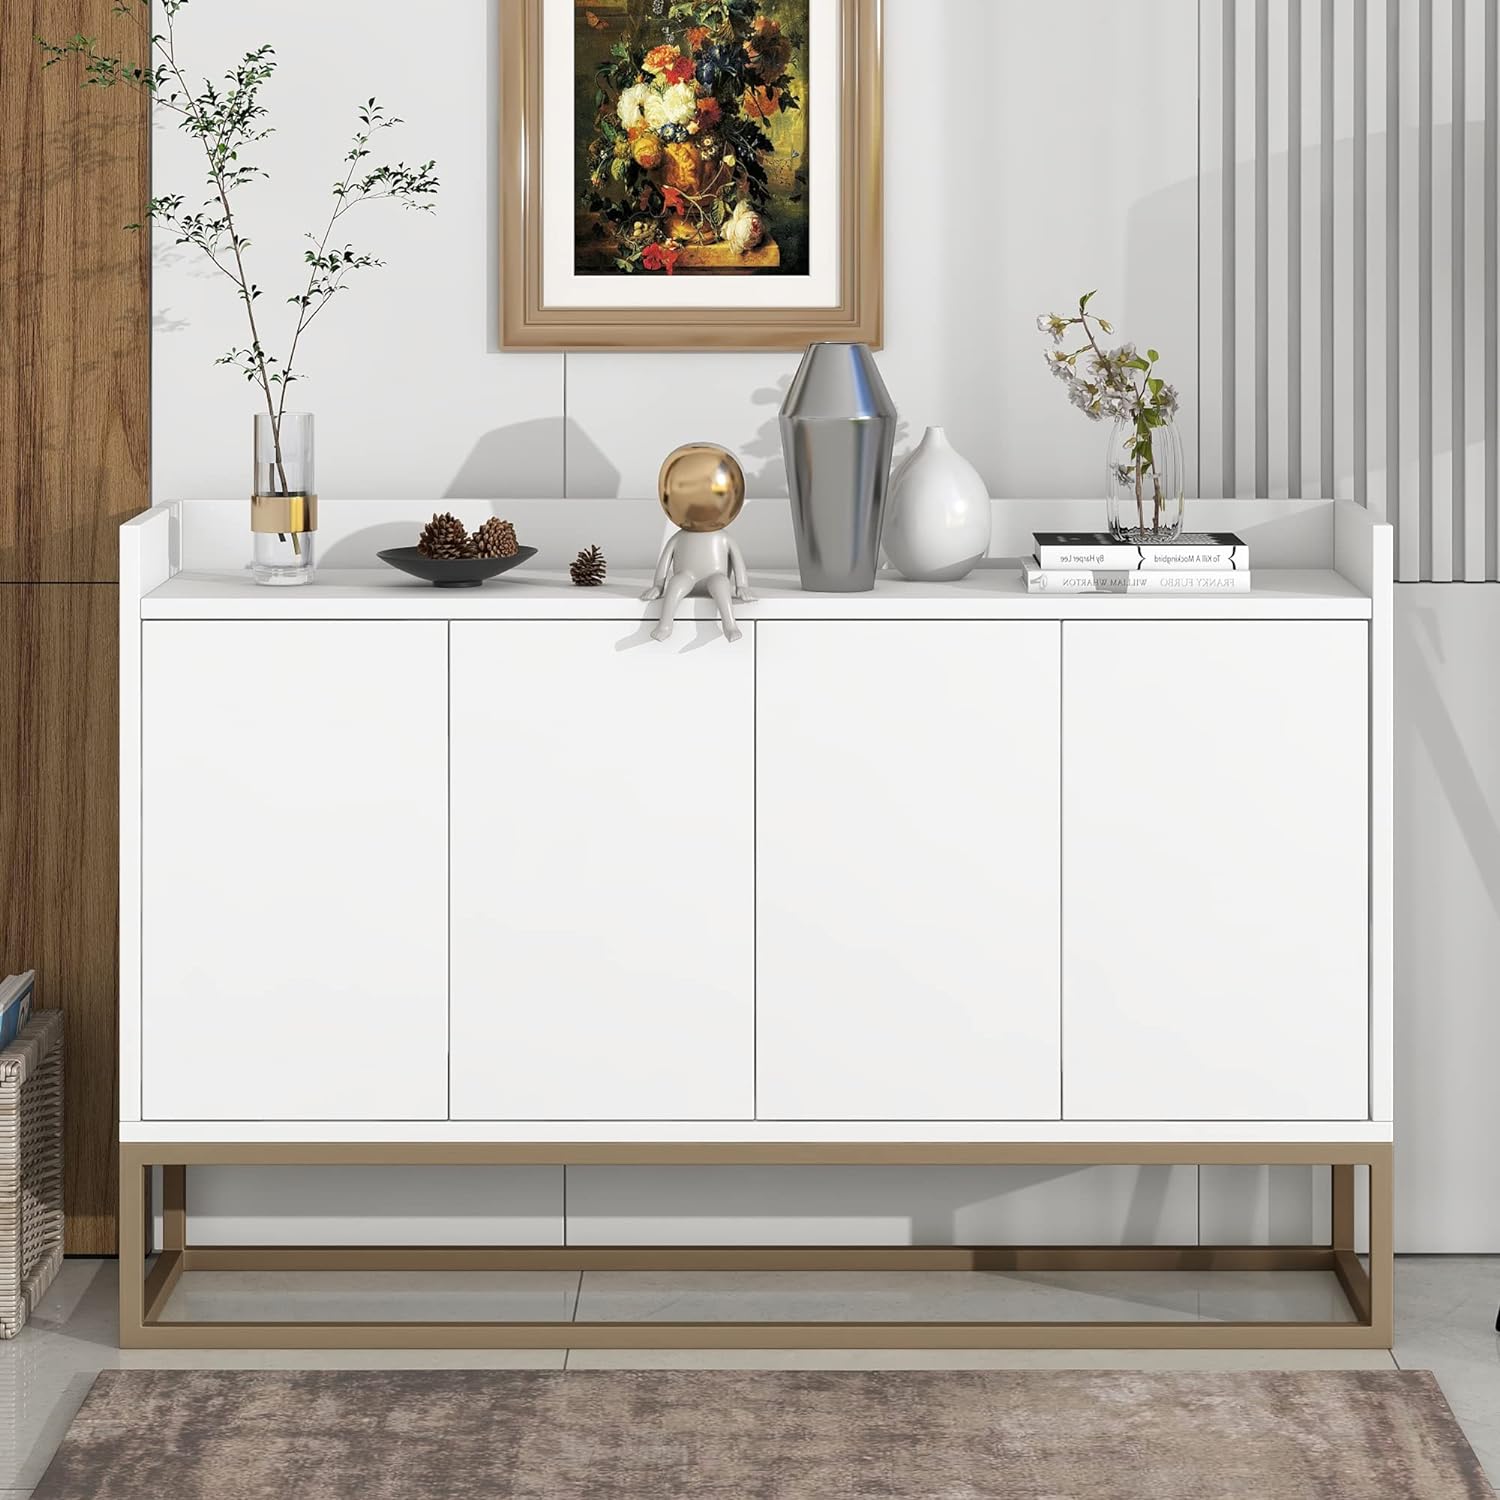 WILLIAMSPACE 47 White Sideboard Buffet Cabinet with 4 Doors & Adjustable Shelf, Modern Floor Storage Cabinet with Gold Metal Legs for Kitchen Living Room, Large Storage Space (White)